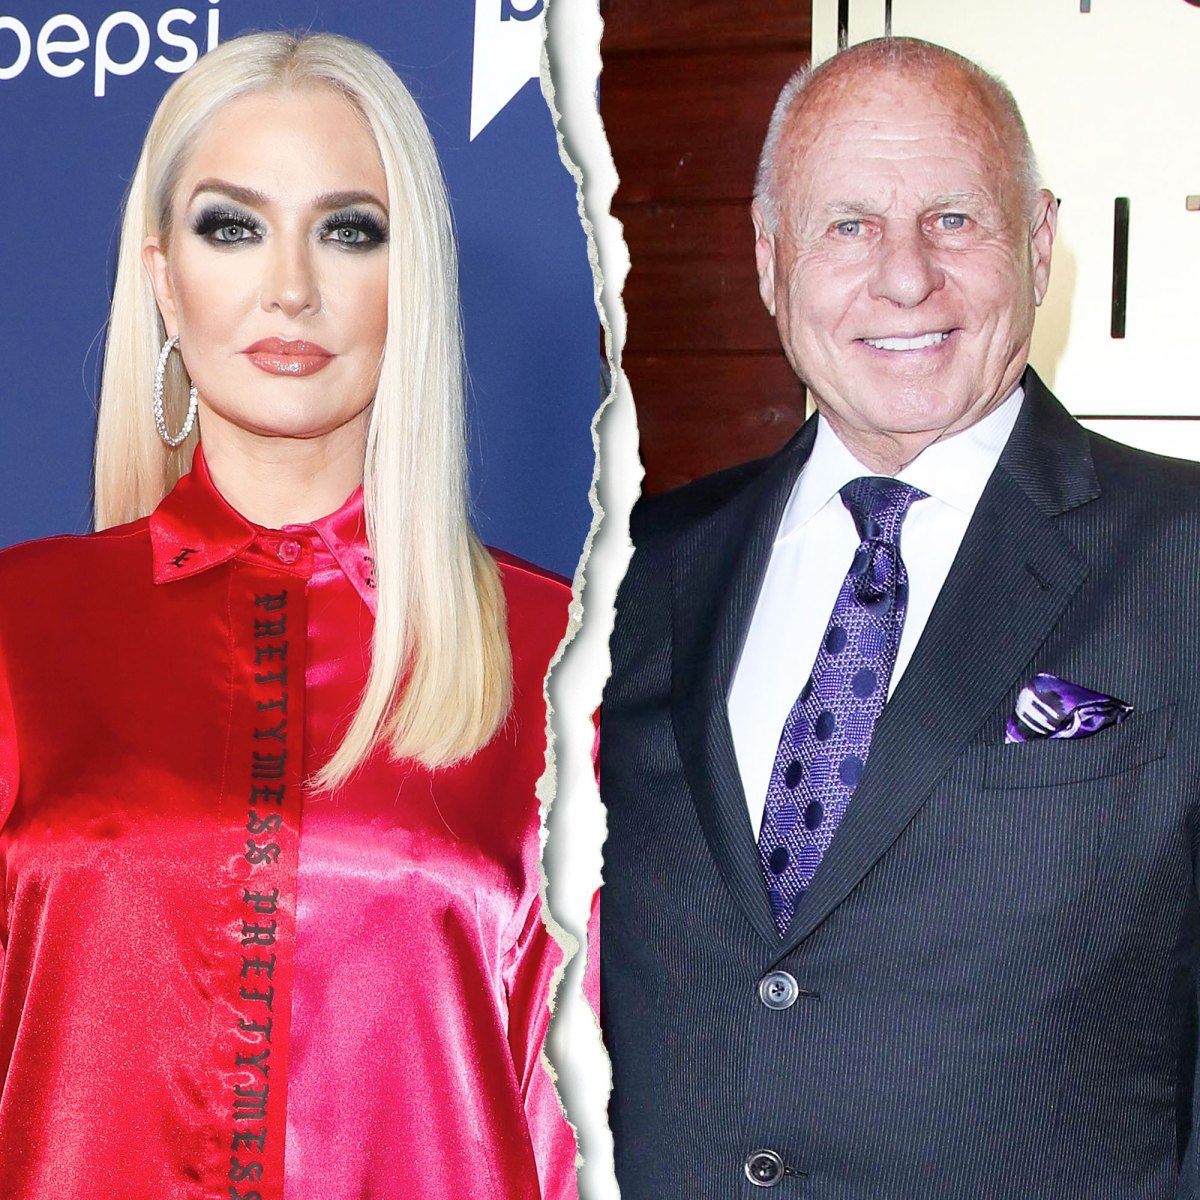 Erika Jayne Opens Up On Why She Filed For Divorce!